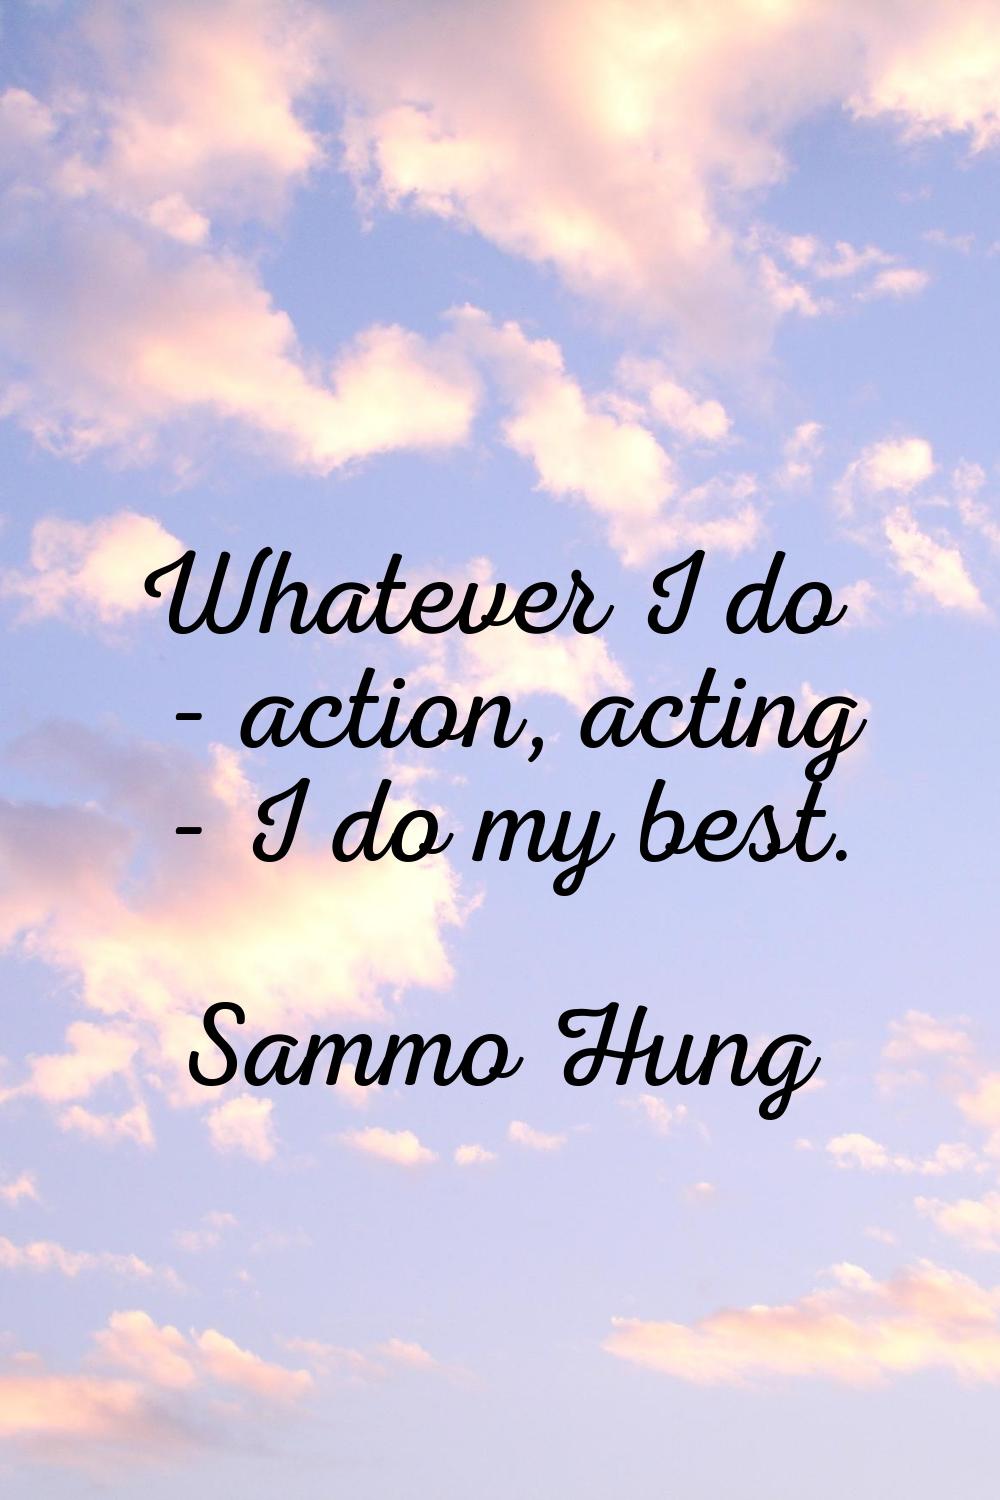 Whatever I do - action, acting - I do my best.